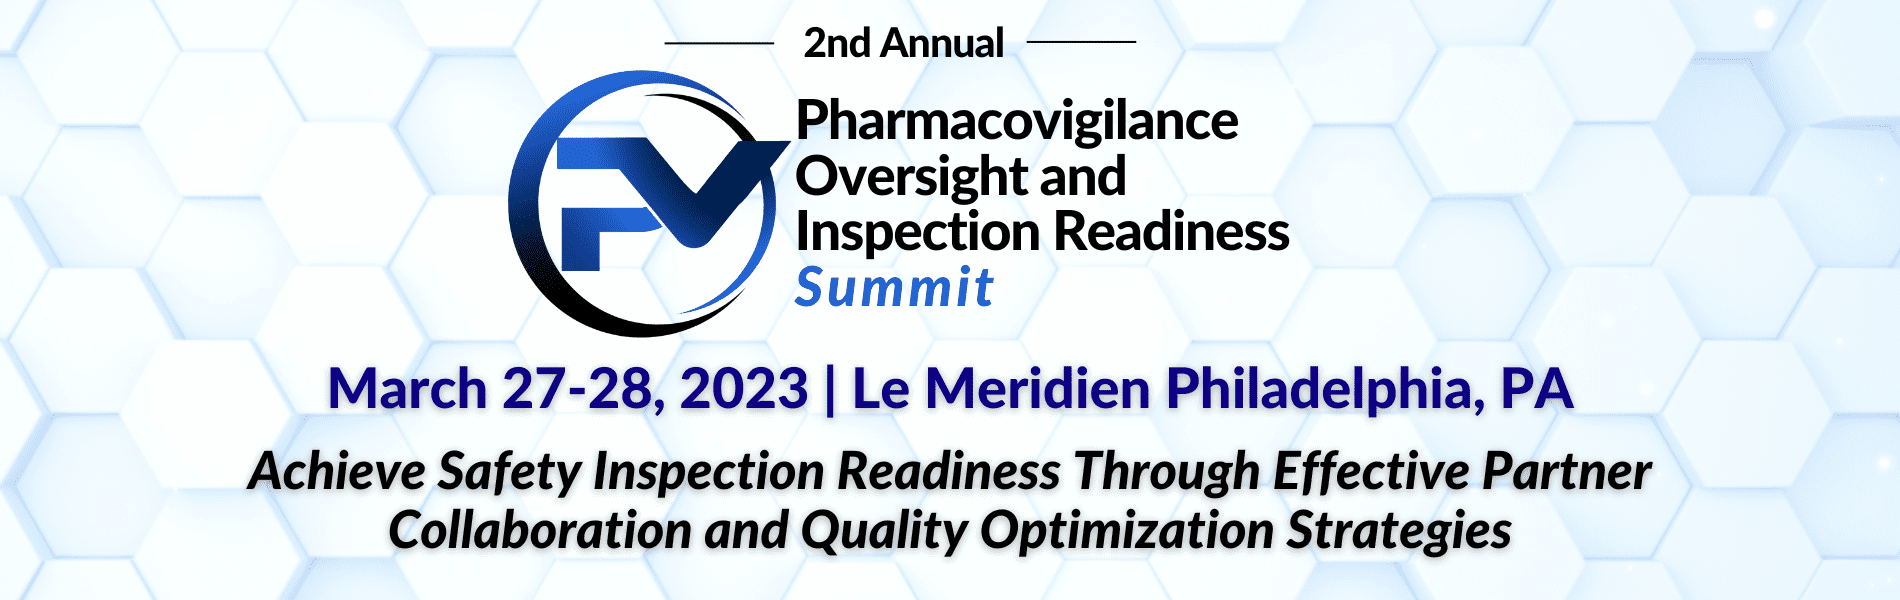 Banner of 2nd Pharmacovigilance Oversight and Inspection Readiness Summit, , March 27-28, 2023 - Le Meridien Philadelphia, PA, Achieve Safety Inspection Readiness Through Effective Partner Collaboration and Quality Optimization Strategies